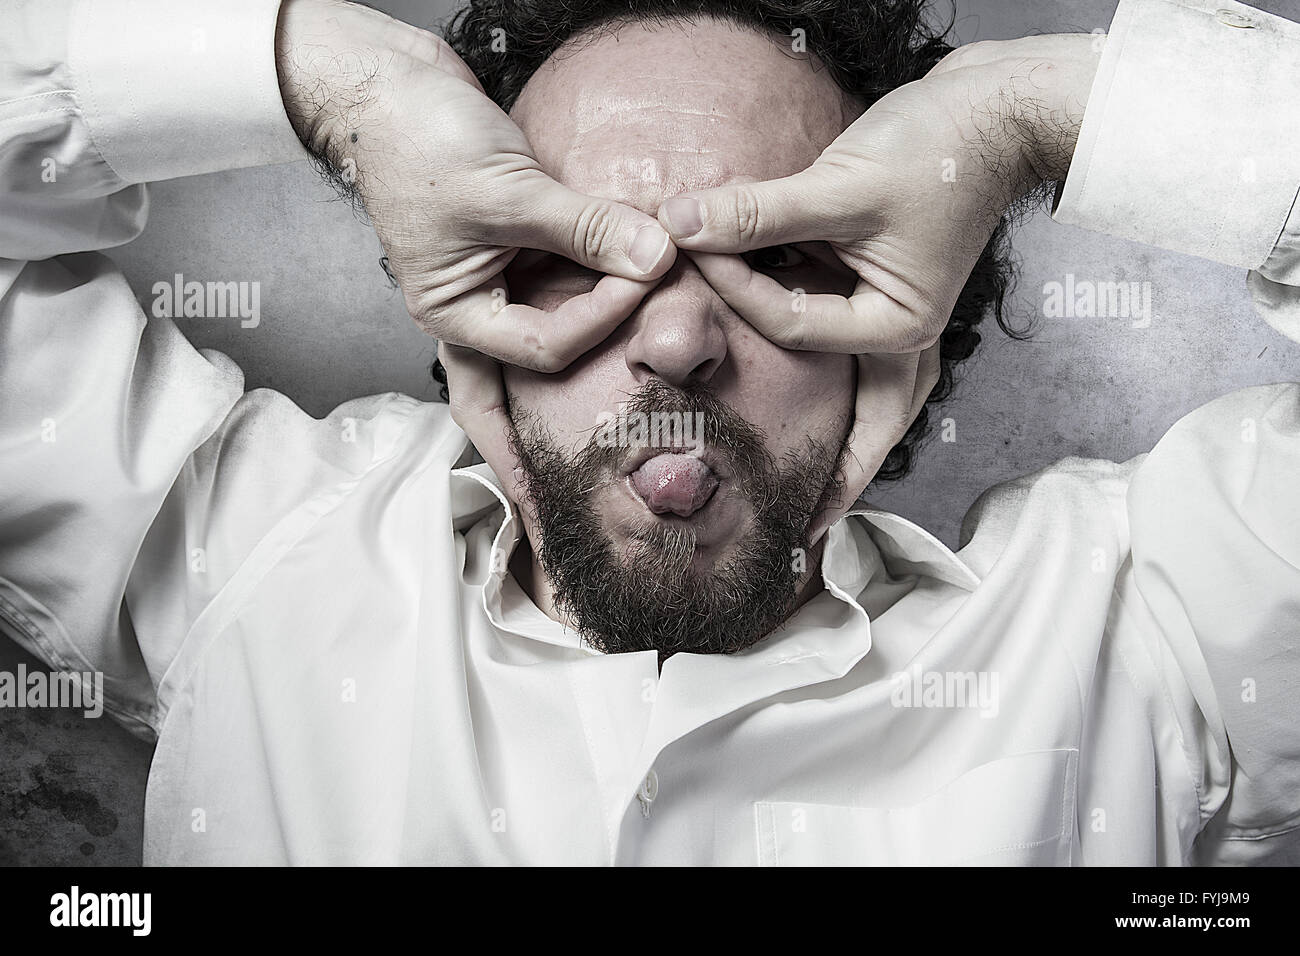 hands as a mask, man in white shirt with funny expressions Stock Photo